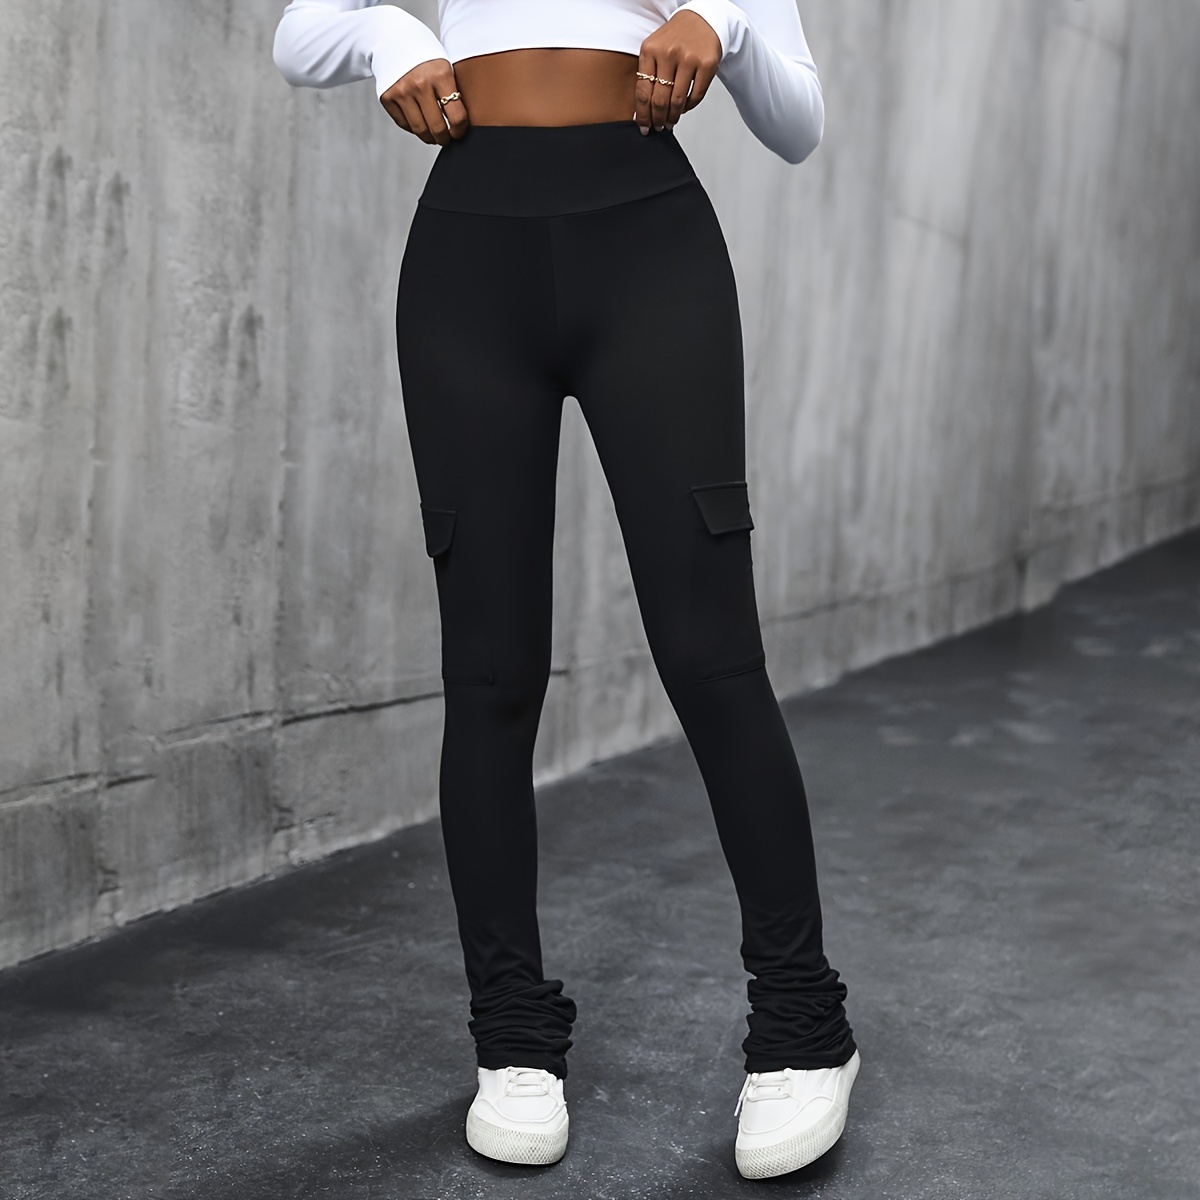 Fesfesfes Fashion Women Pant Solid Sports Casual Skinny Pockets High Waist  Pants Sale Items 